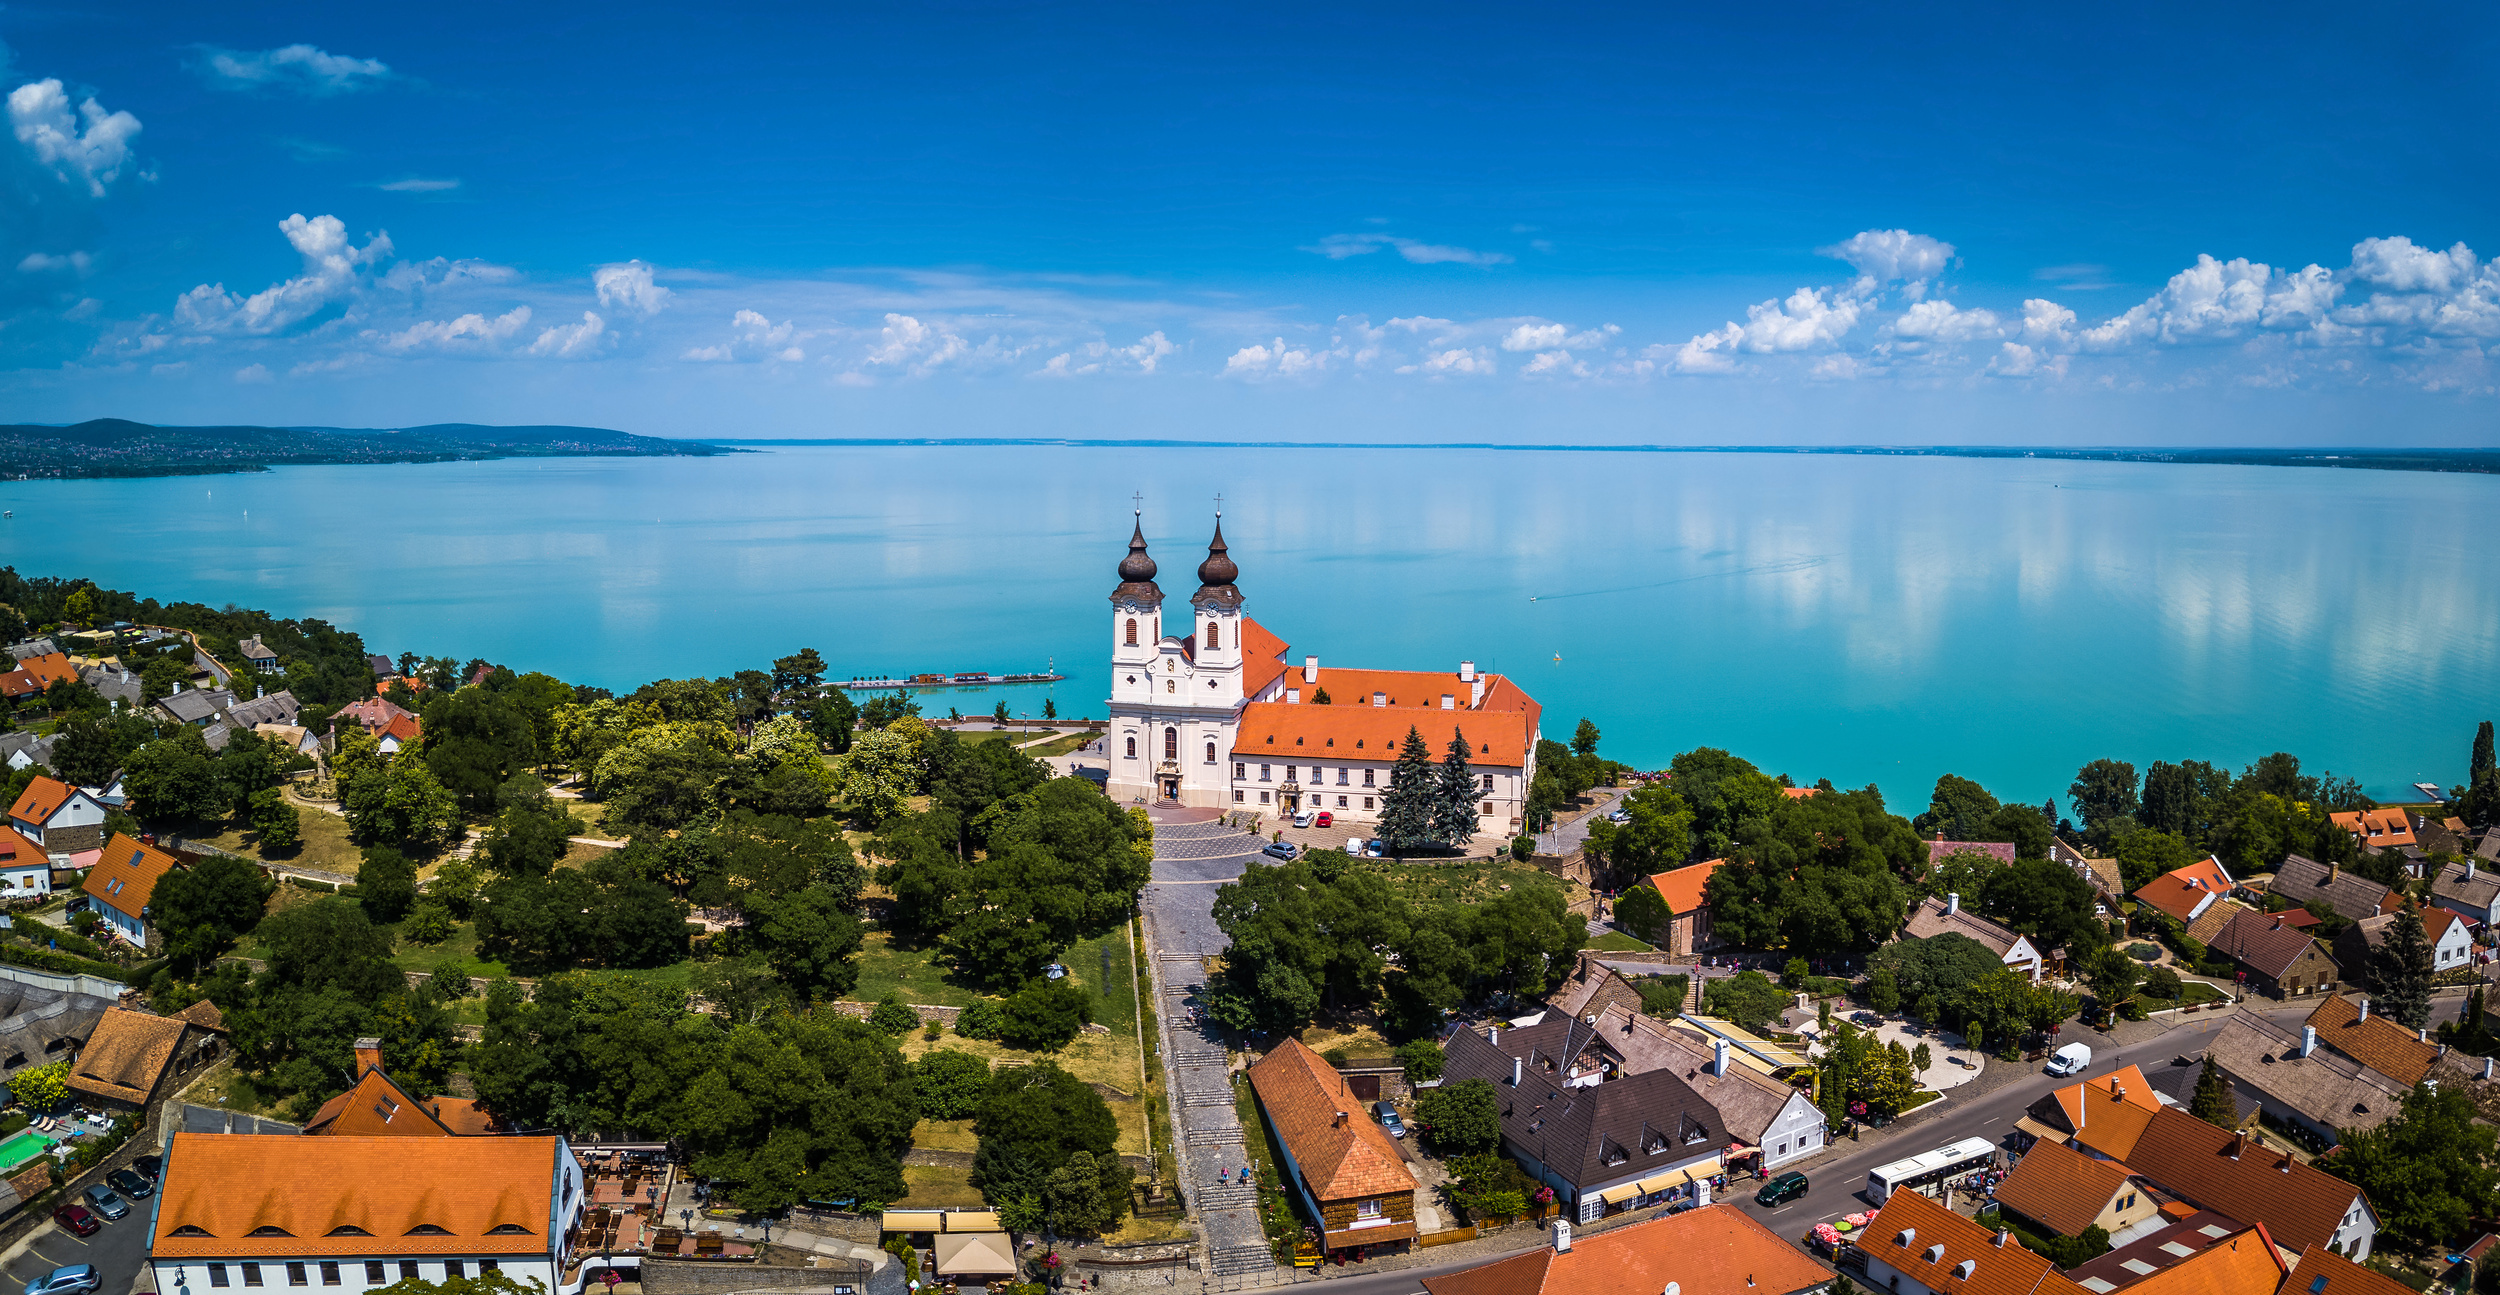 <p>Hungary’s main lake is located about an hour and a half from Budapest. You can drive yourself for a day of relaxation or take a tour. But know these typically last all day, upwards of eight hours. You can wander the town or just tan at the beach. </p><p><a href='https://www.msn.com/en-us/community/channel/vid-cj9pqbr0vn9in2b6ddcd8sfgpfq6x6utp44fssrv6mc2gtybw0us'>Follow us on MSN to see more of our exclusive lifestyle content.</a></p>